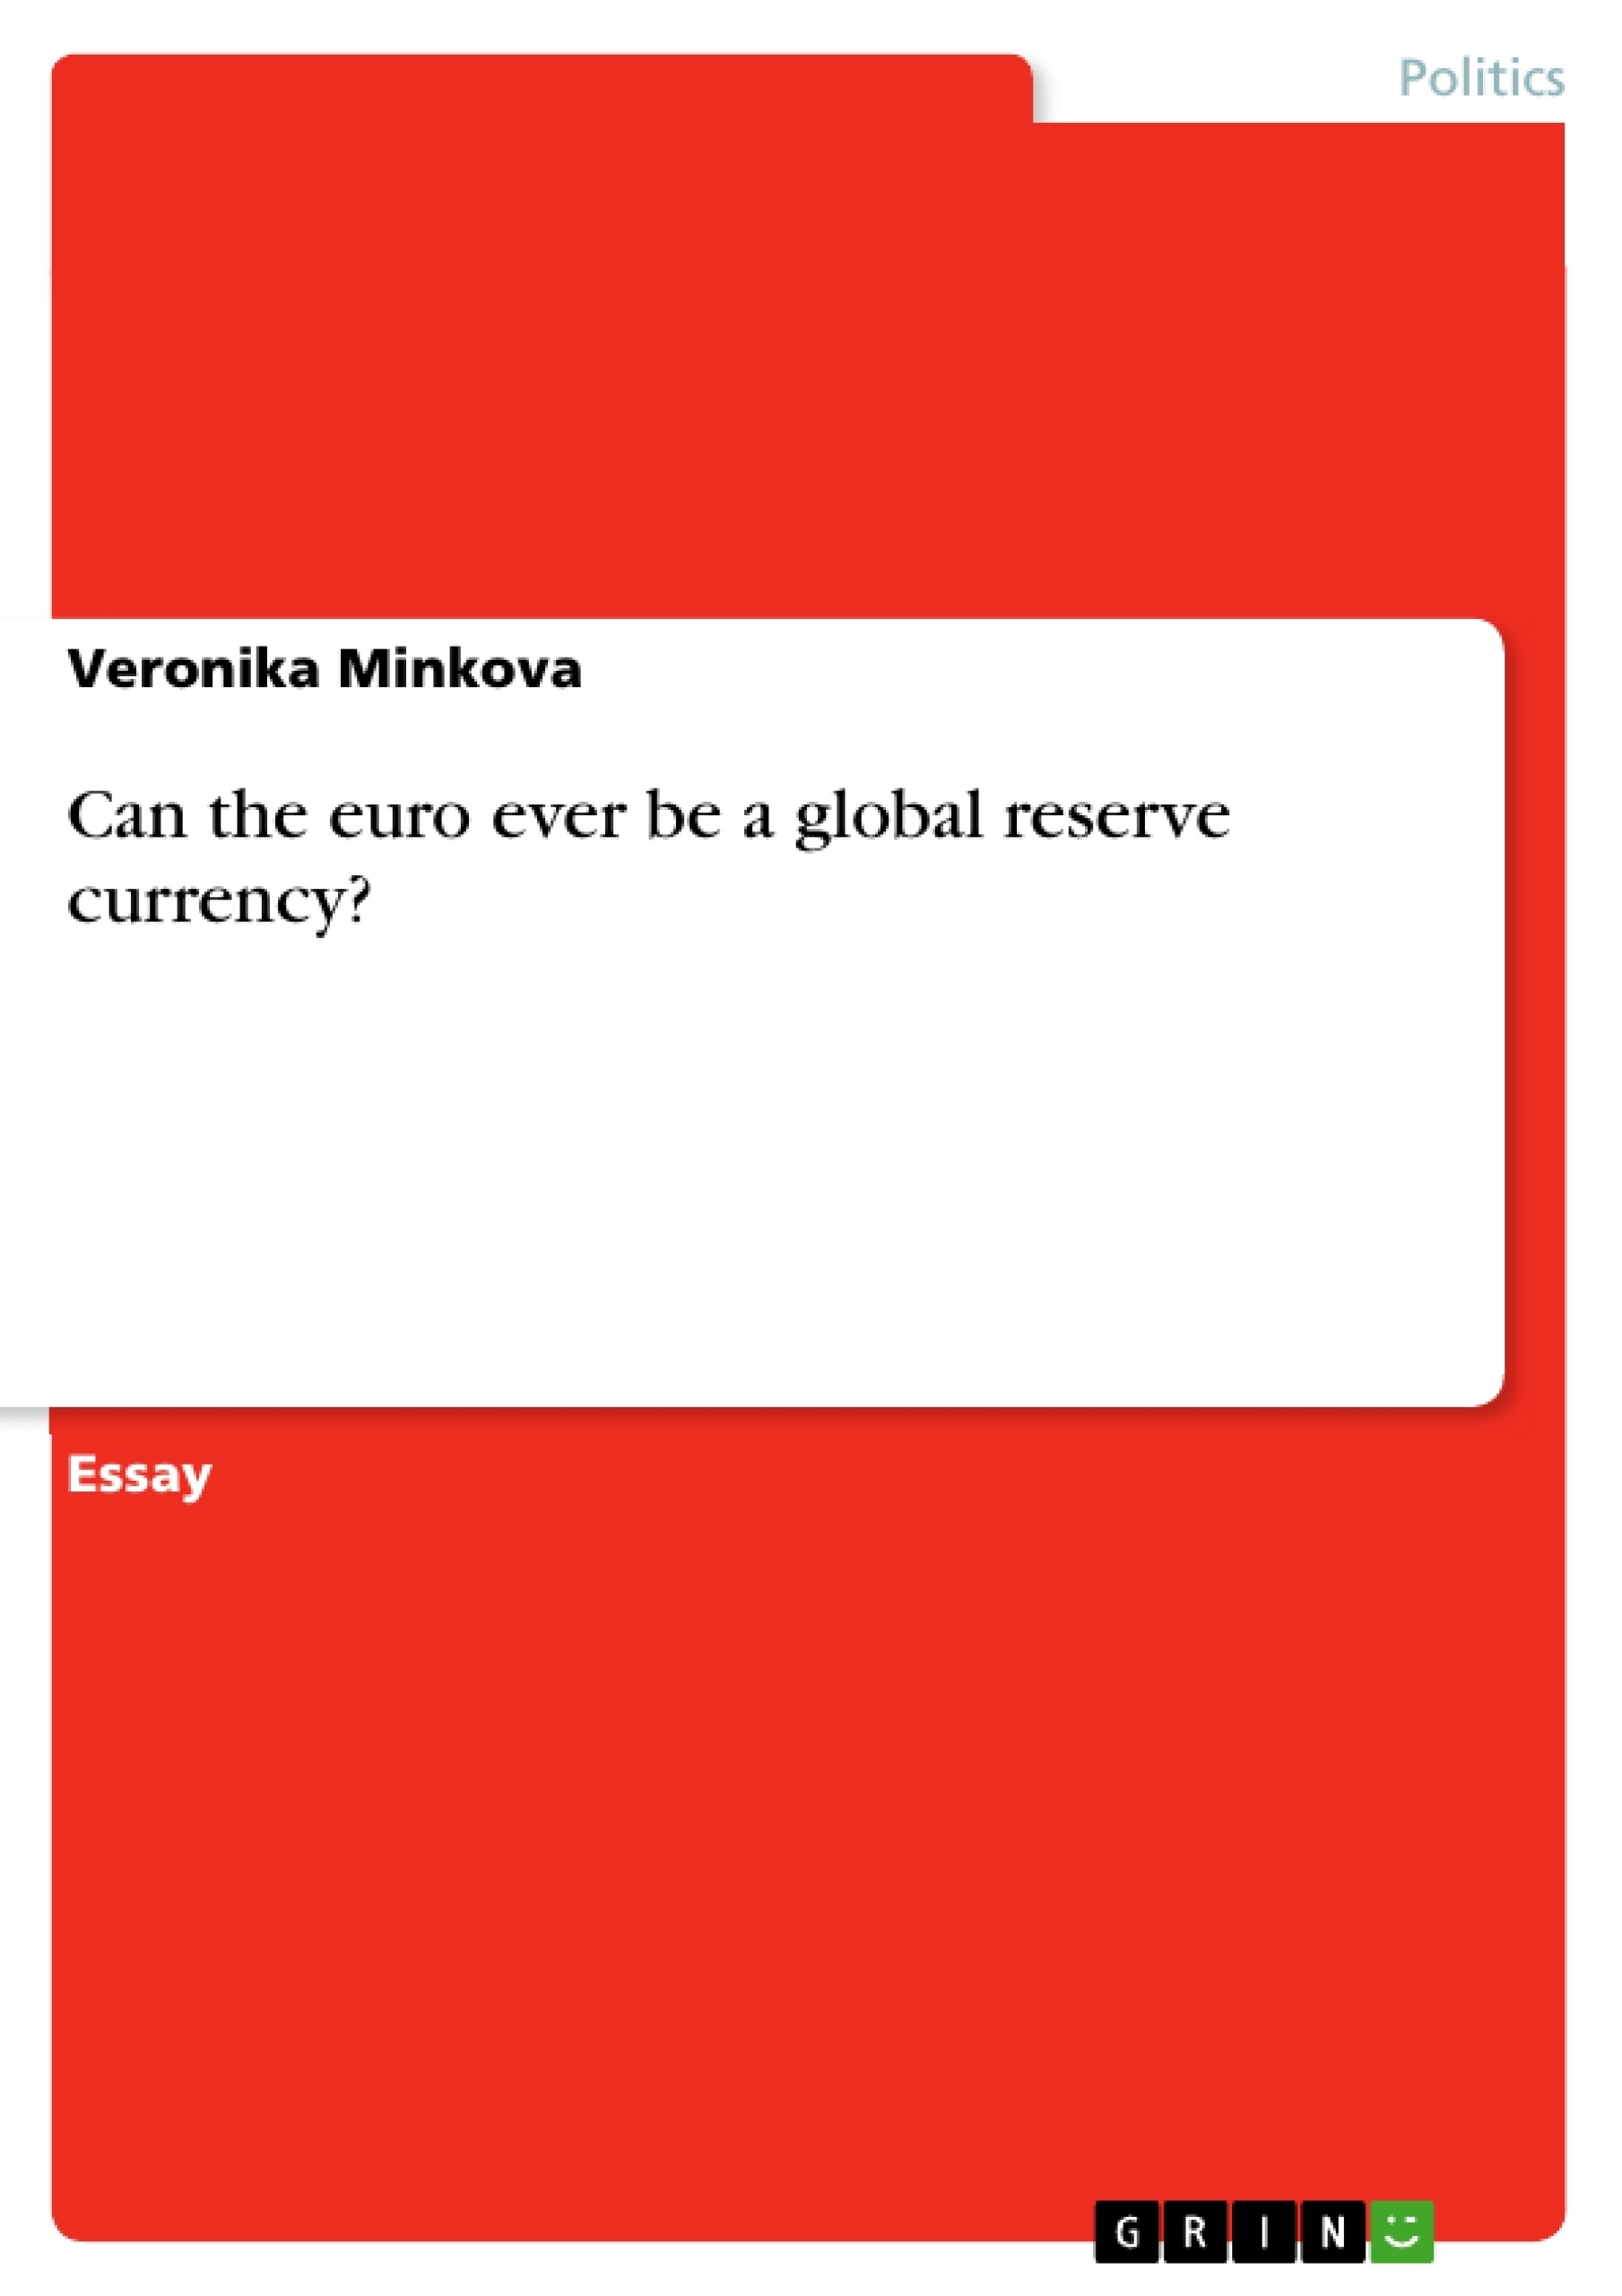 Title: Can the euro ever be a global reserve currency?